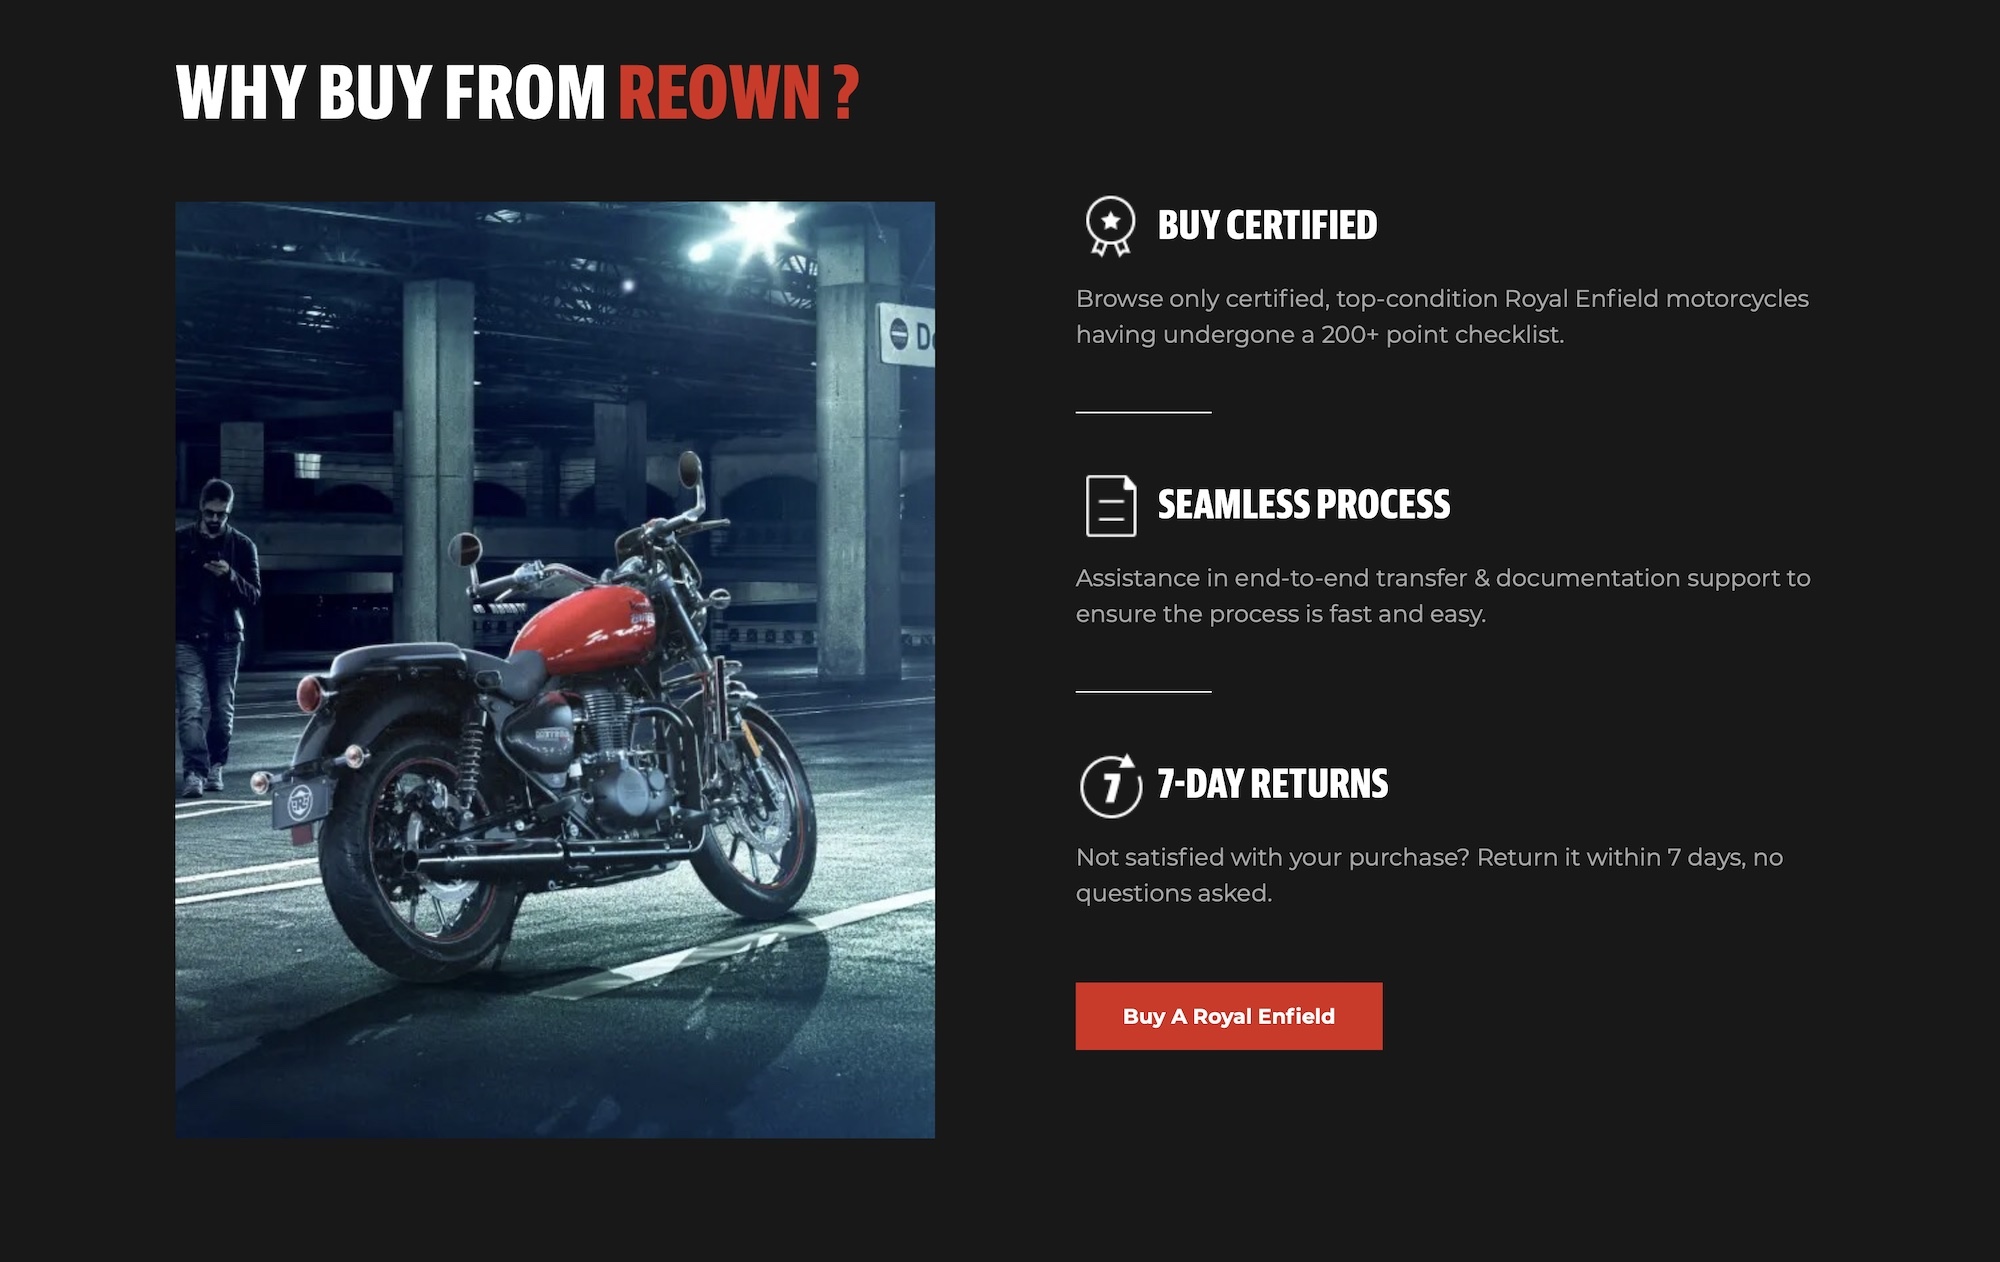 The front page of Royal Enfield's website "Reown."